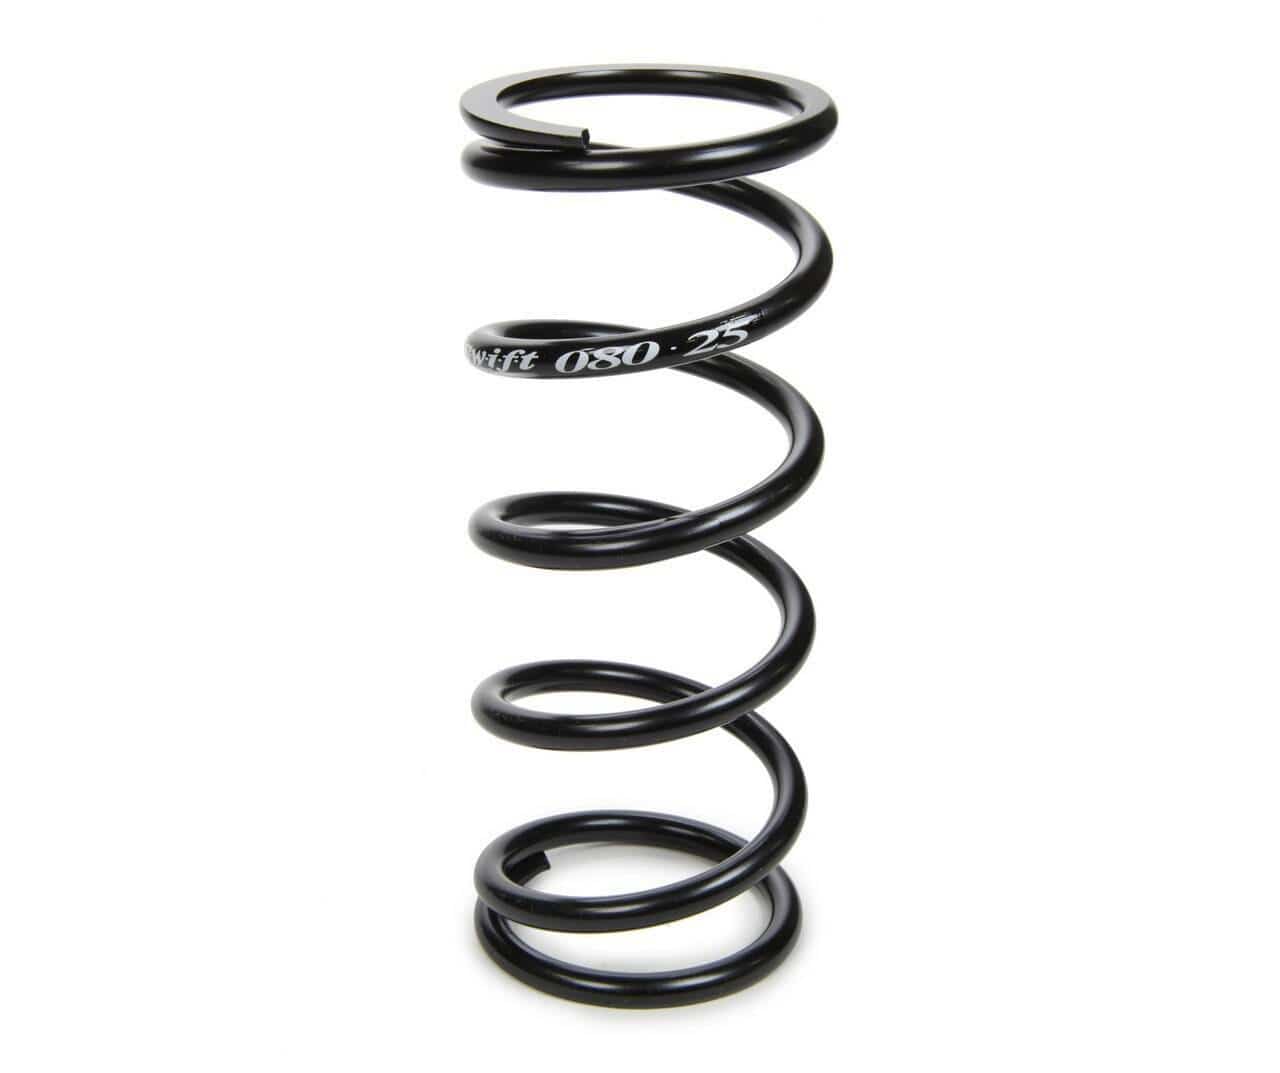 Swift Springs Standard Coilover Spring (Barrel Type) - ID 2.5", 7" Length